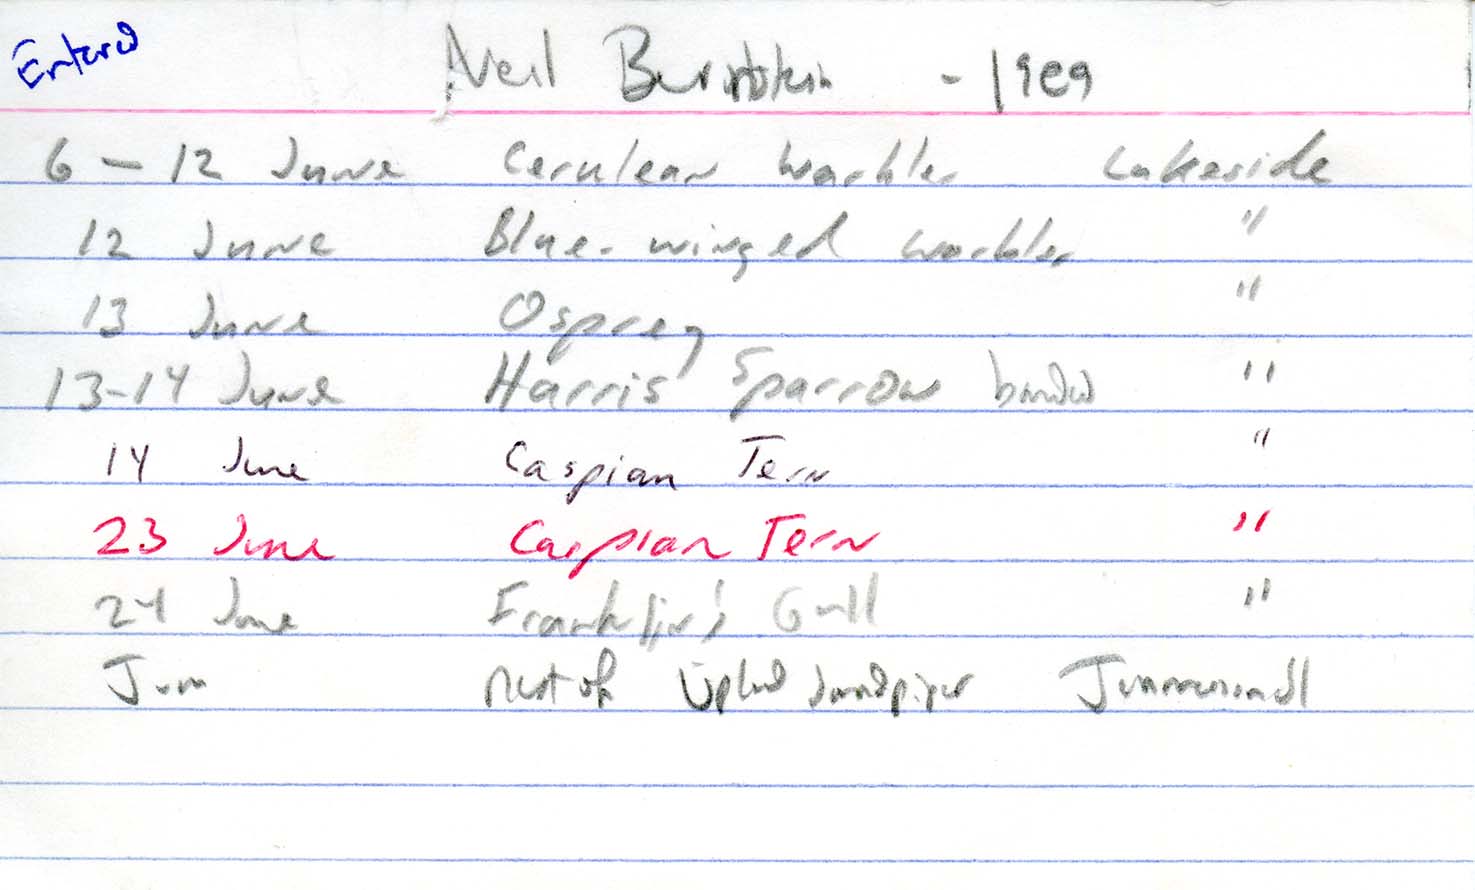 Field notes contributed by Neil Bernstein, summer 1989